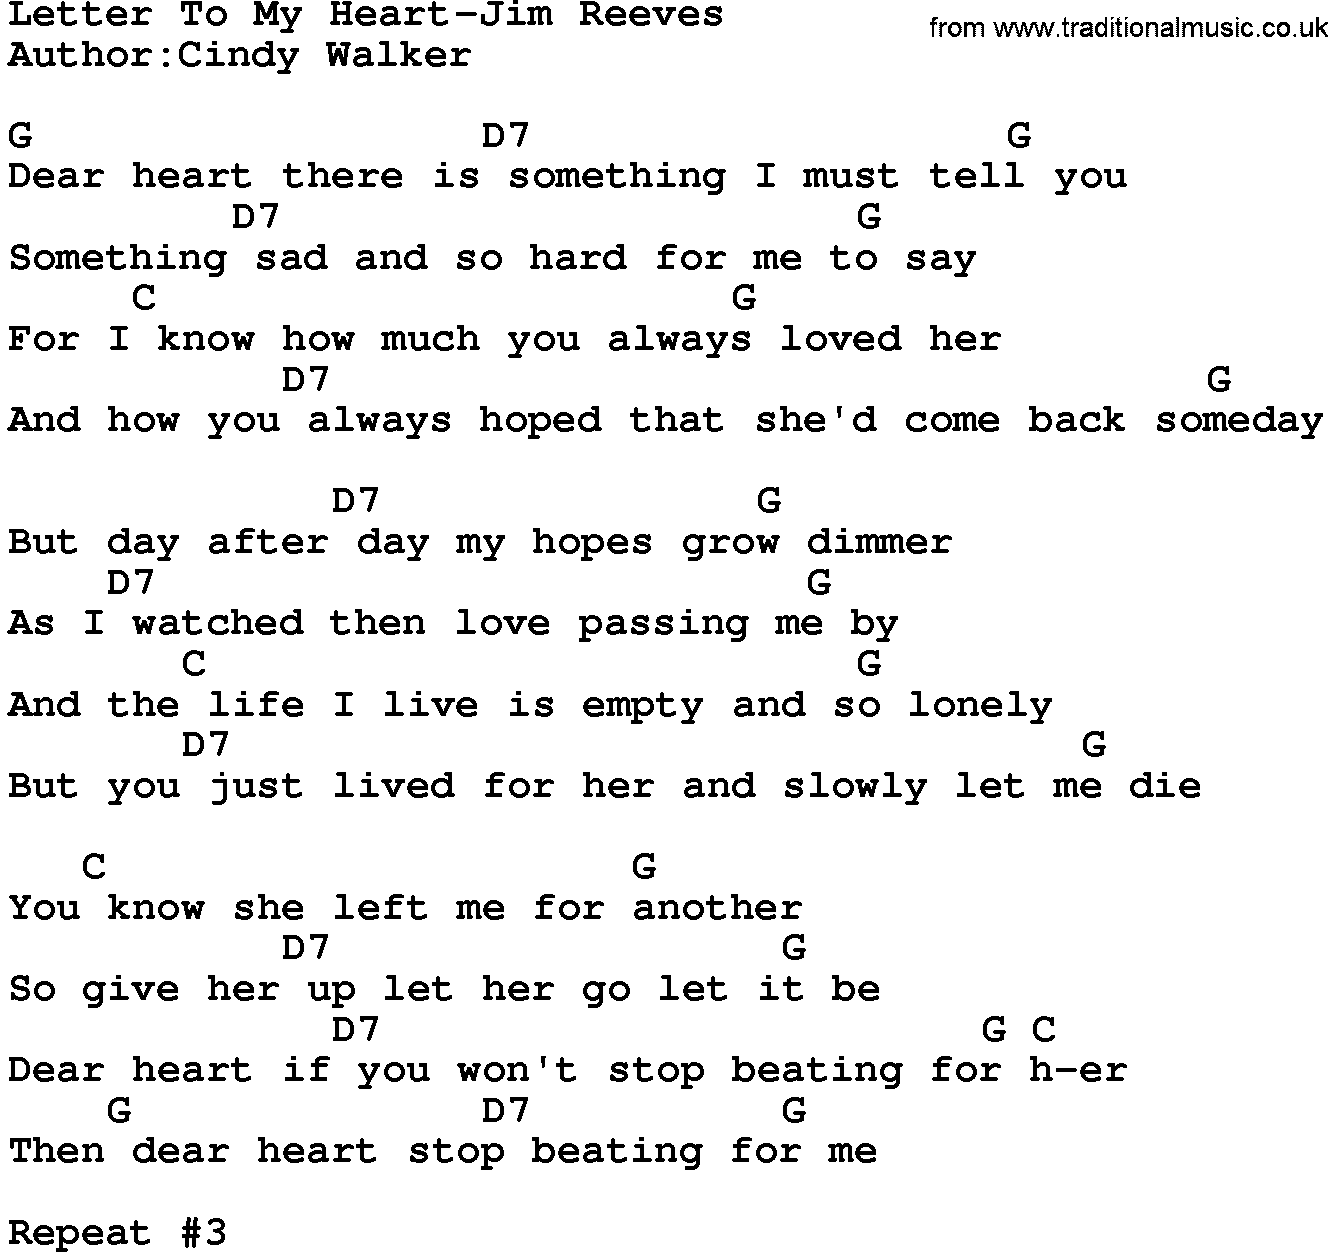 Country music song: Letter To My Heart-Jim Reeves lyrics and chords